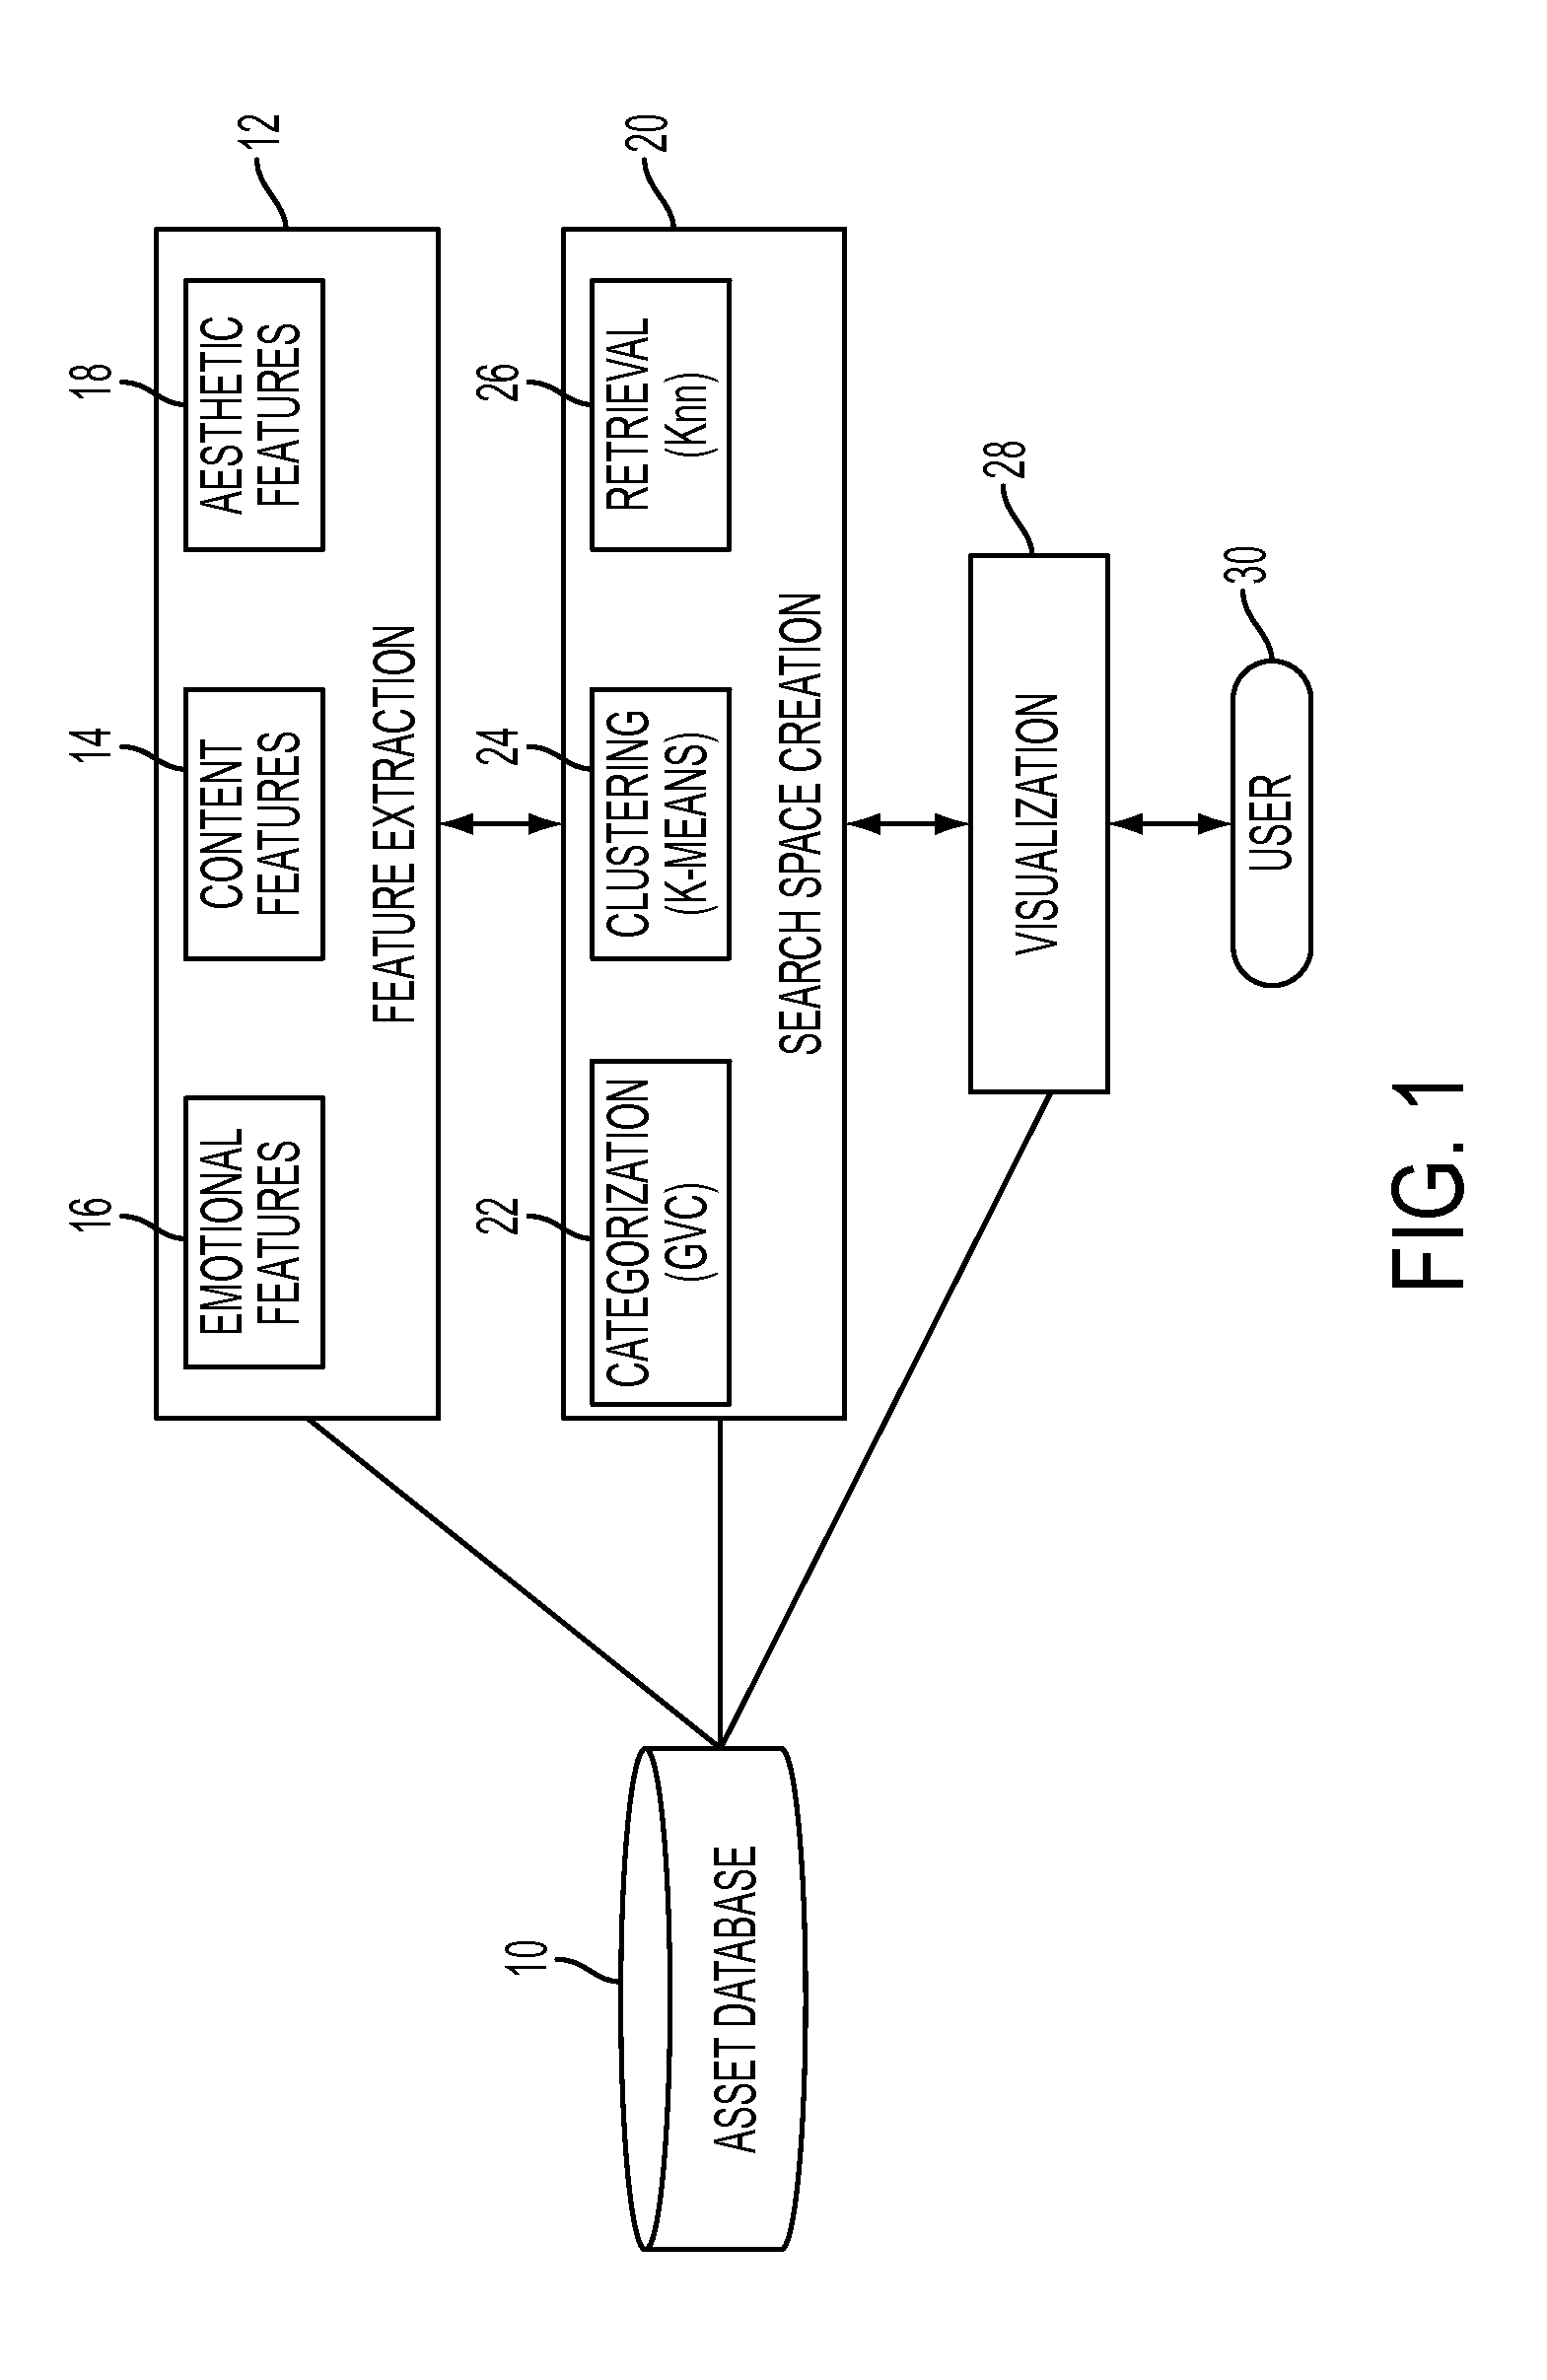 System for creative image navigation and exploration